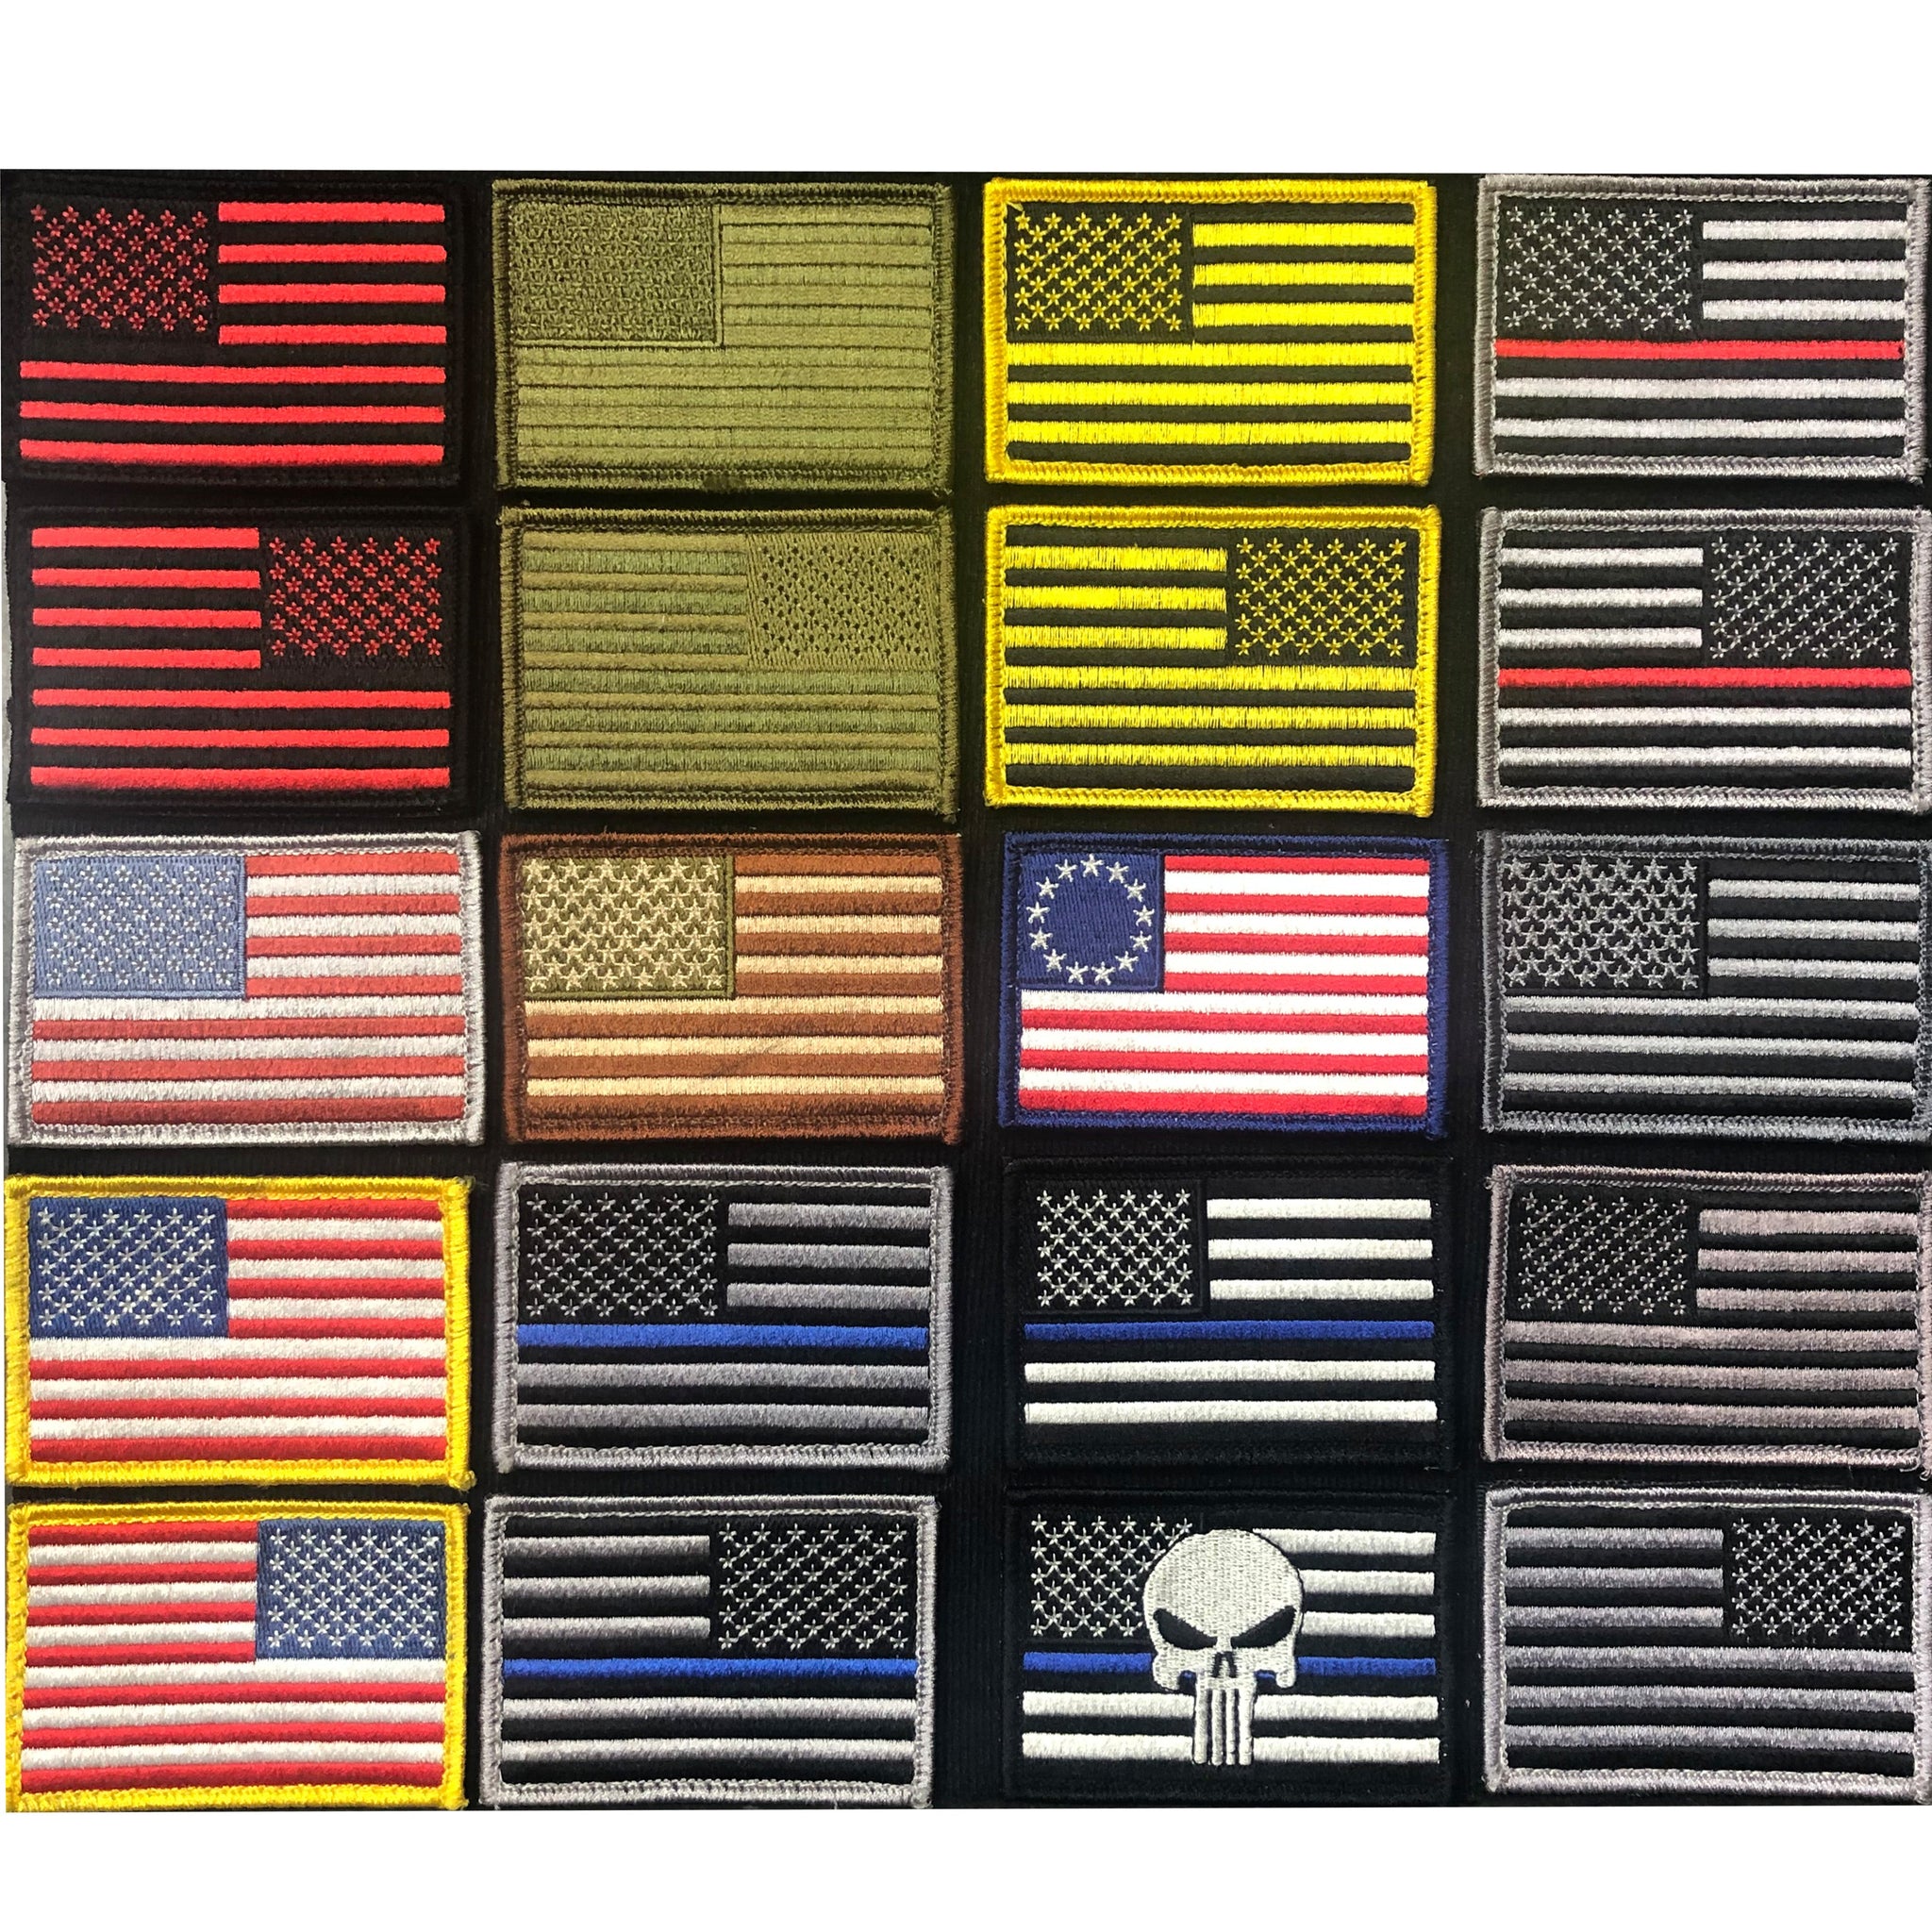 Tactical Morale Patch USA Embroidered American Flag Patch Velcro